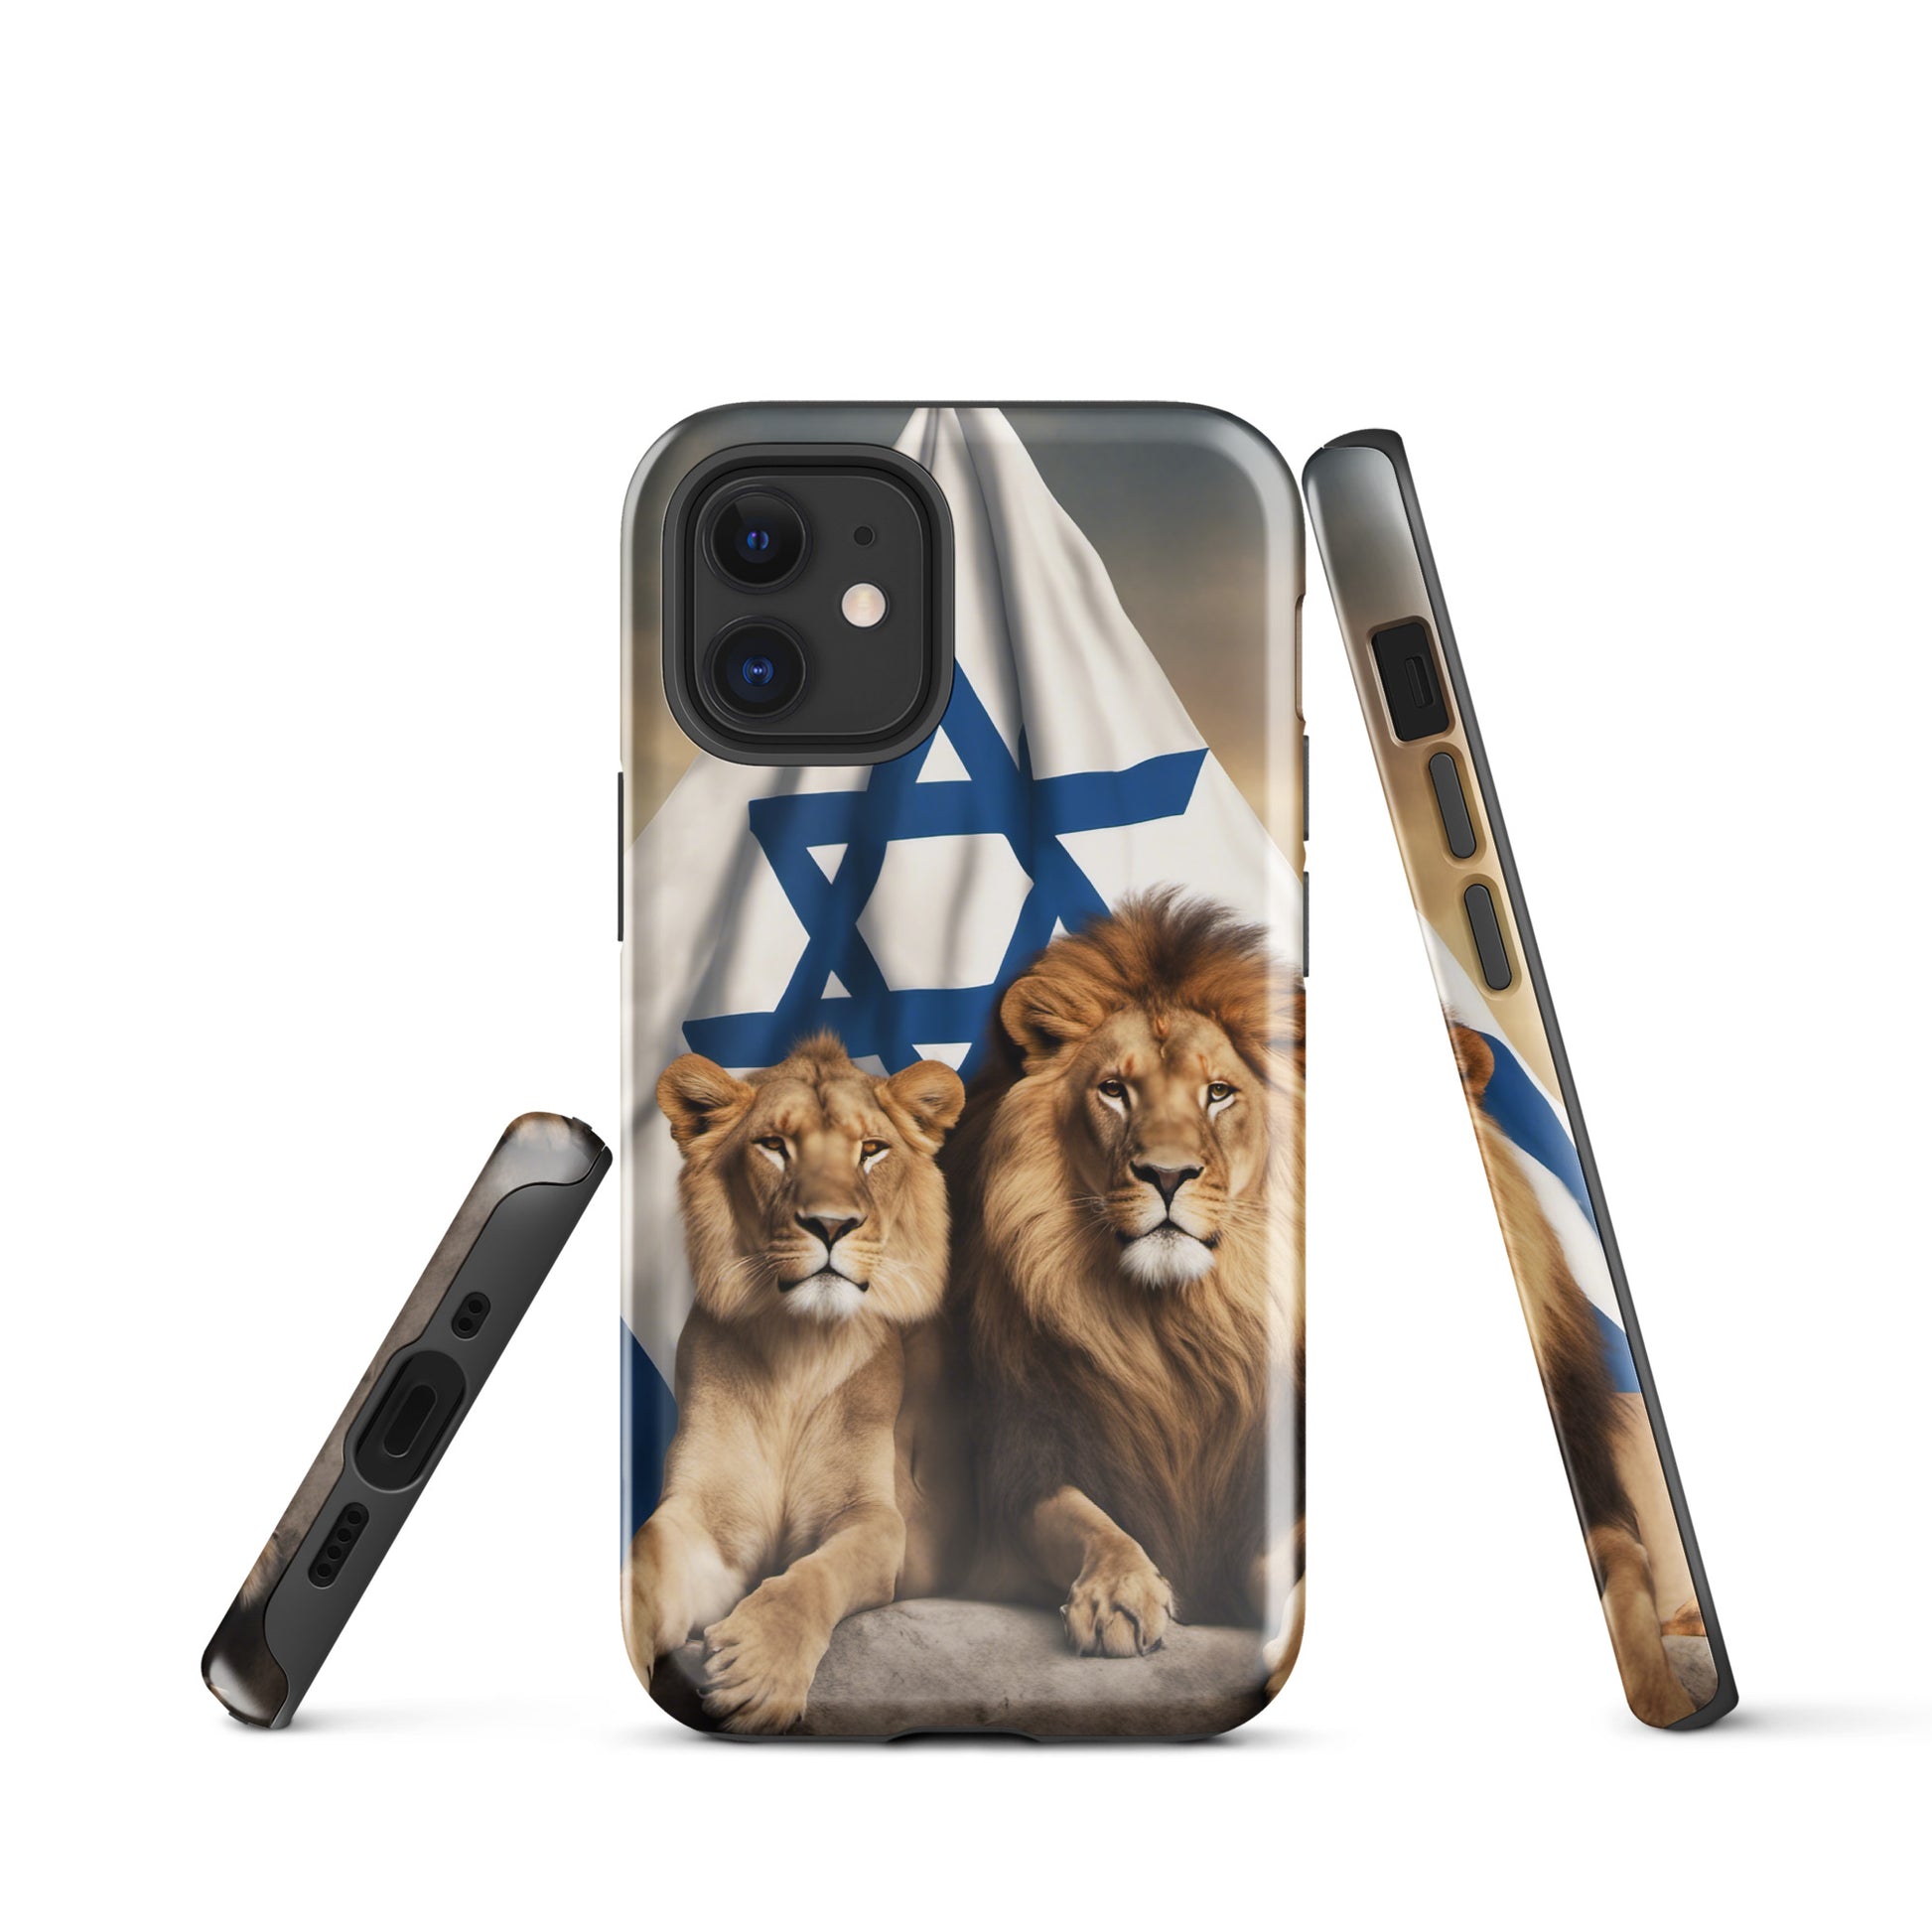 Israel will Prevail Tough Case for iPhone® CedarHill Country Market